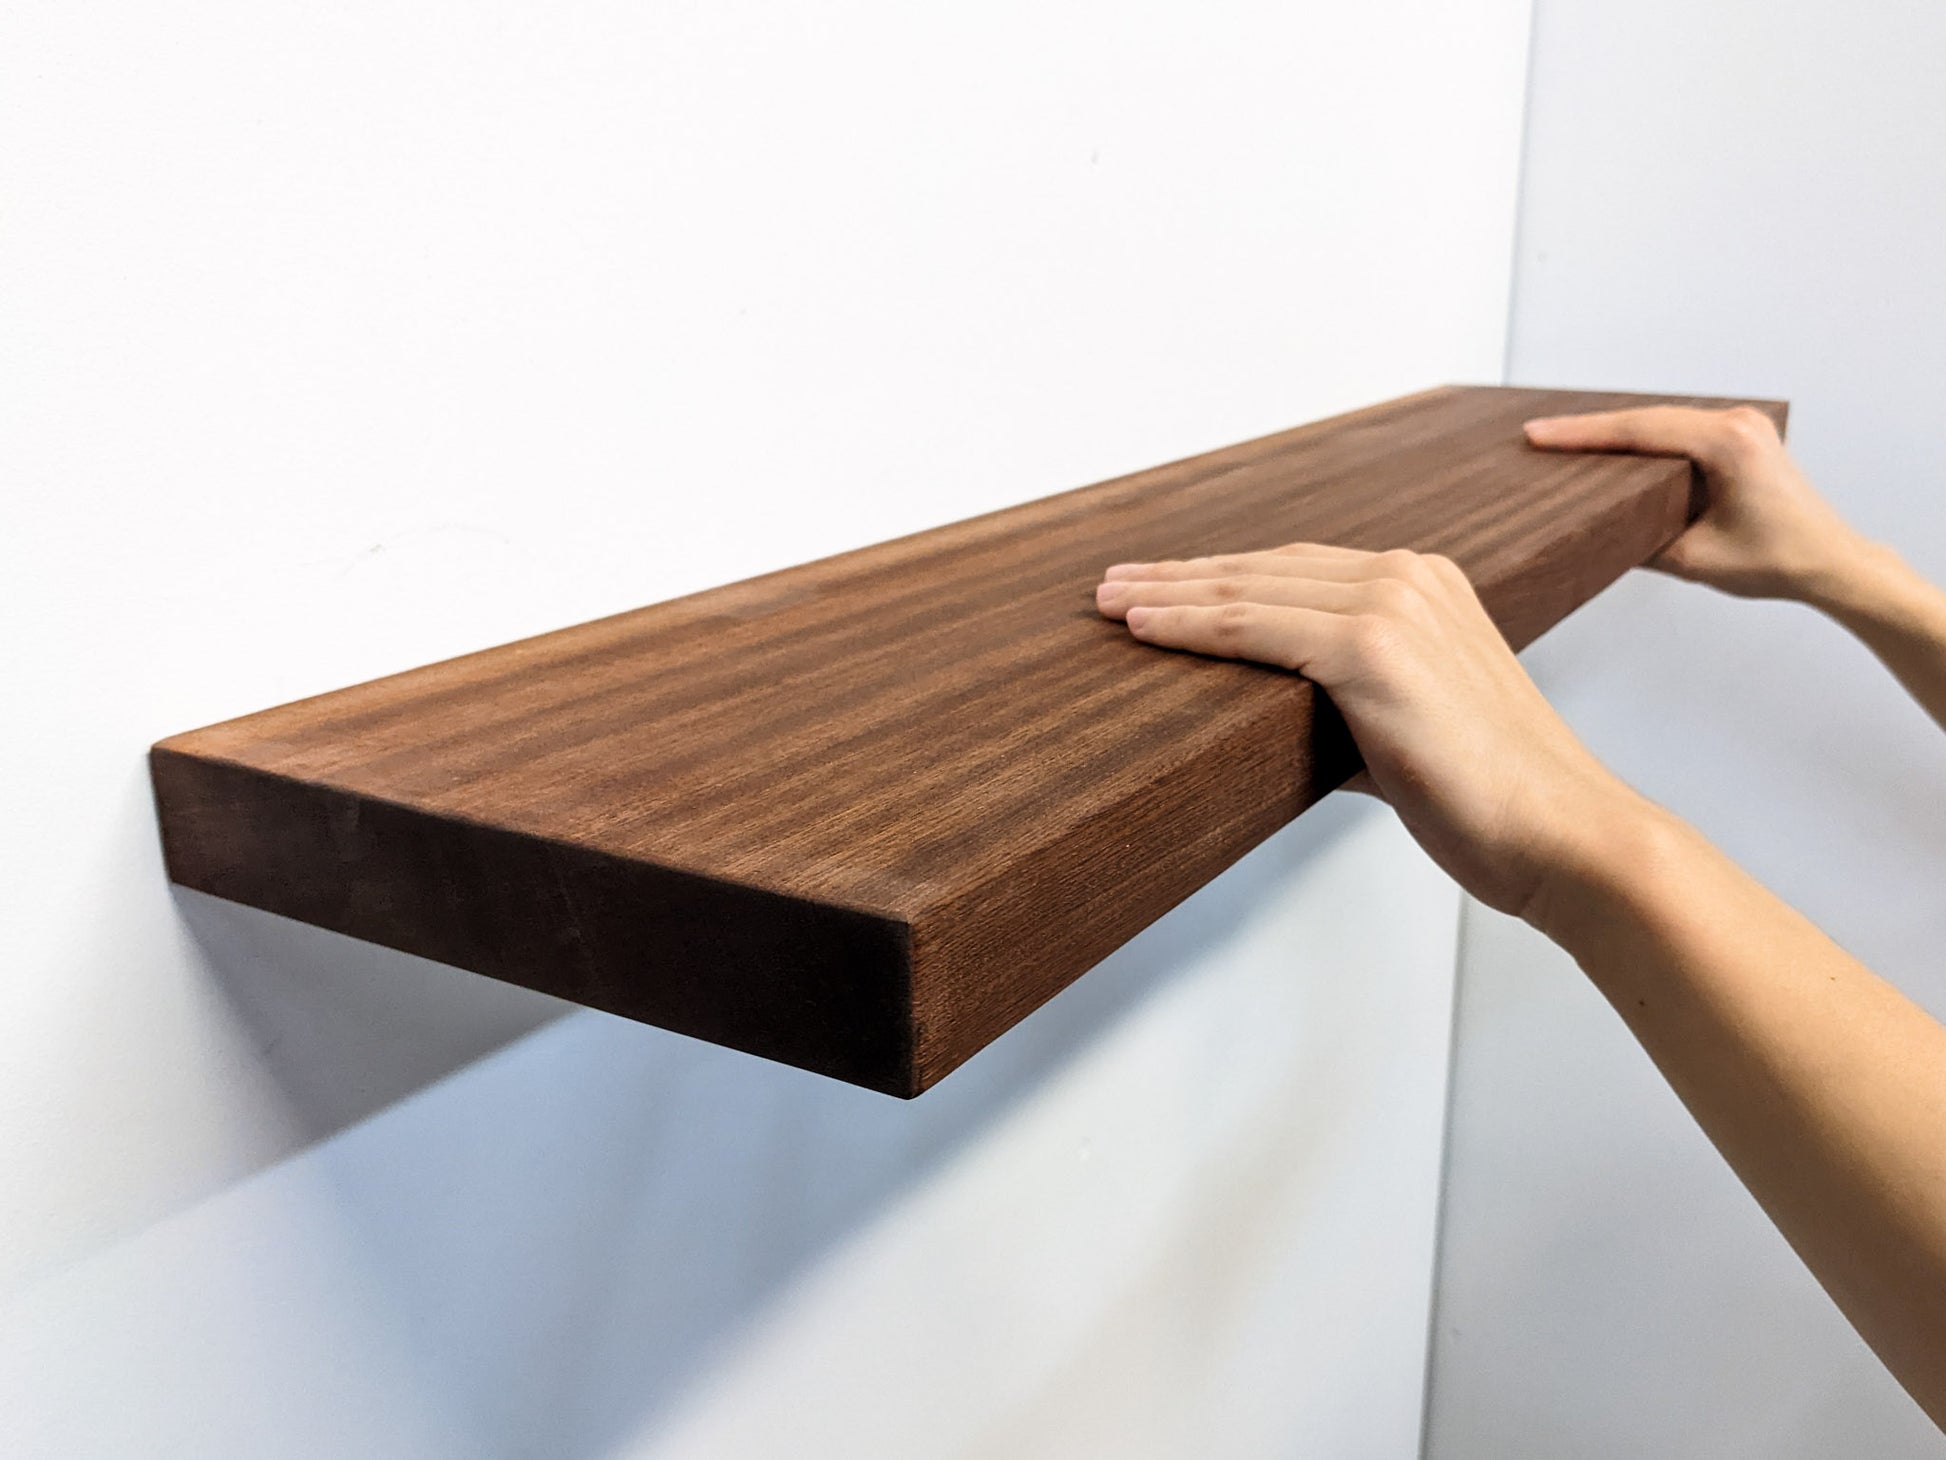 An extra-long, heavy-duty mahogany floating shelf is sucessfully installed and sits securely on a wall. Two hands grip the top and bottom of the front-facing side.